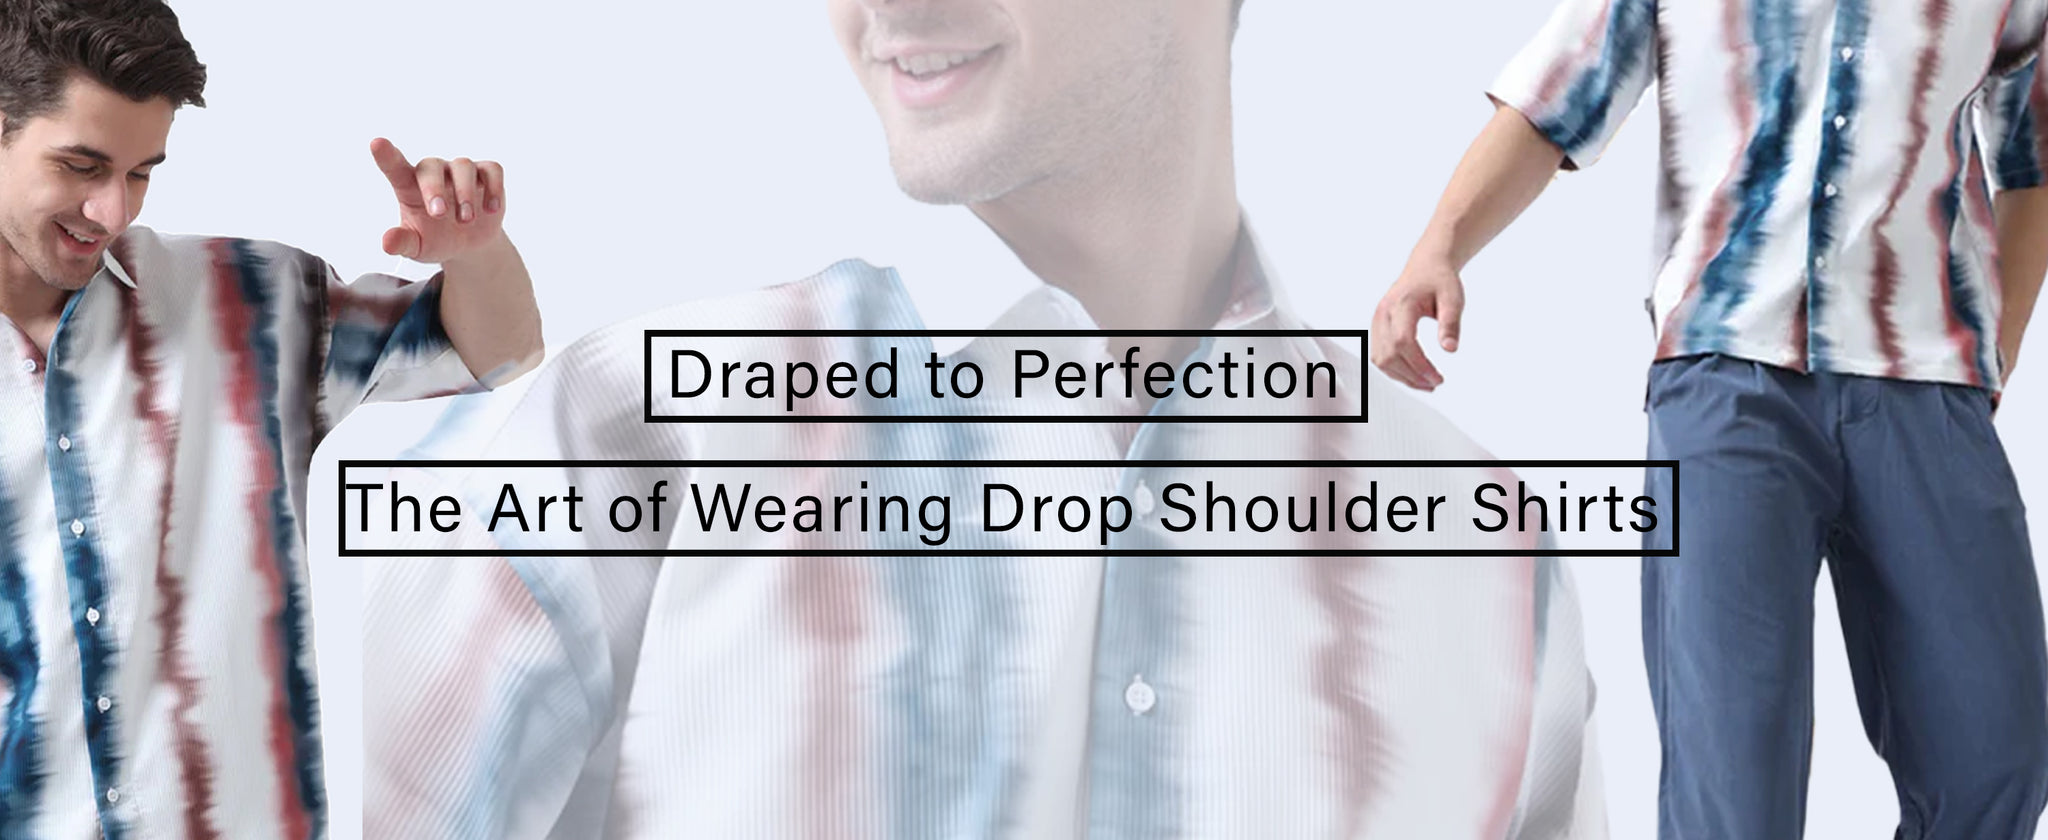 Draped to Perfection: The Art of Wearing Drop Shoulder Shirts